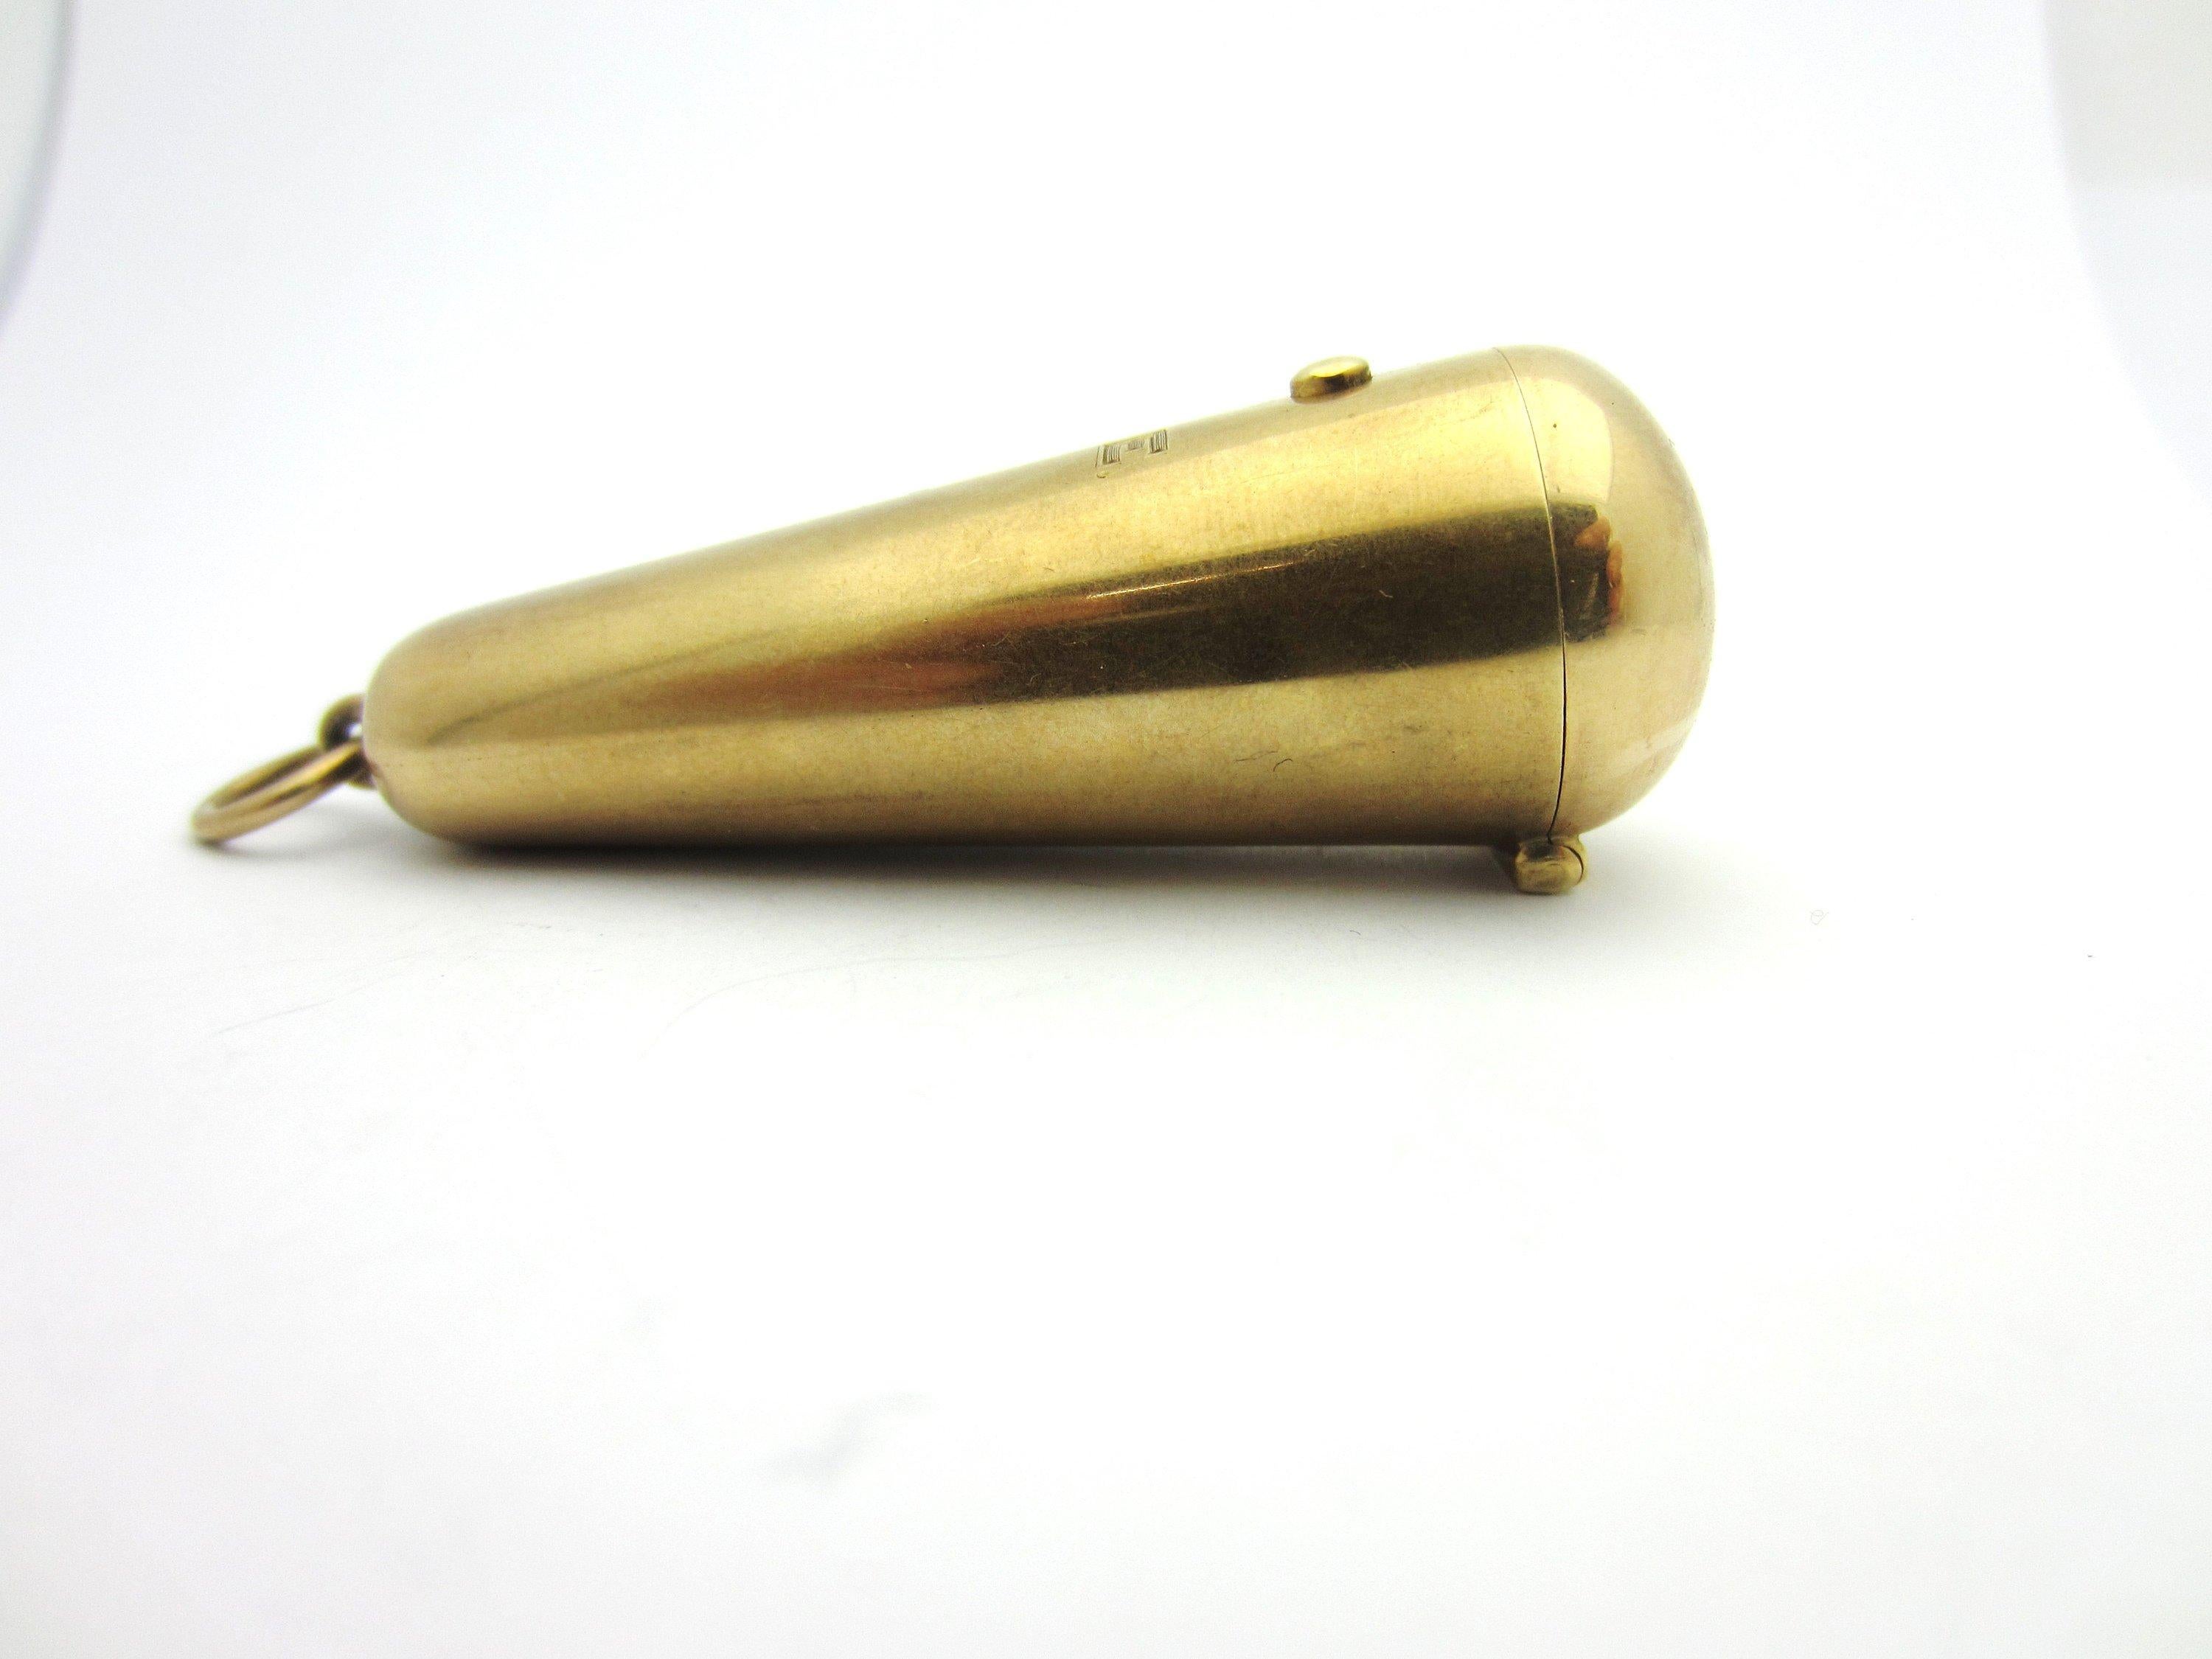 This fabulous Art Deco compartment pendant by Sloan & Co. may have had a number of original uses, such as as a lipstick holder or ash catcher.  It was likely part of a woman's chatelaine. 

Crafted from solid 14k rosy yellow gold, the pendant